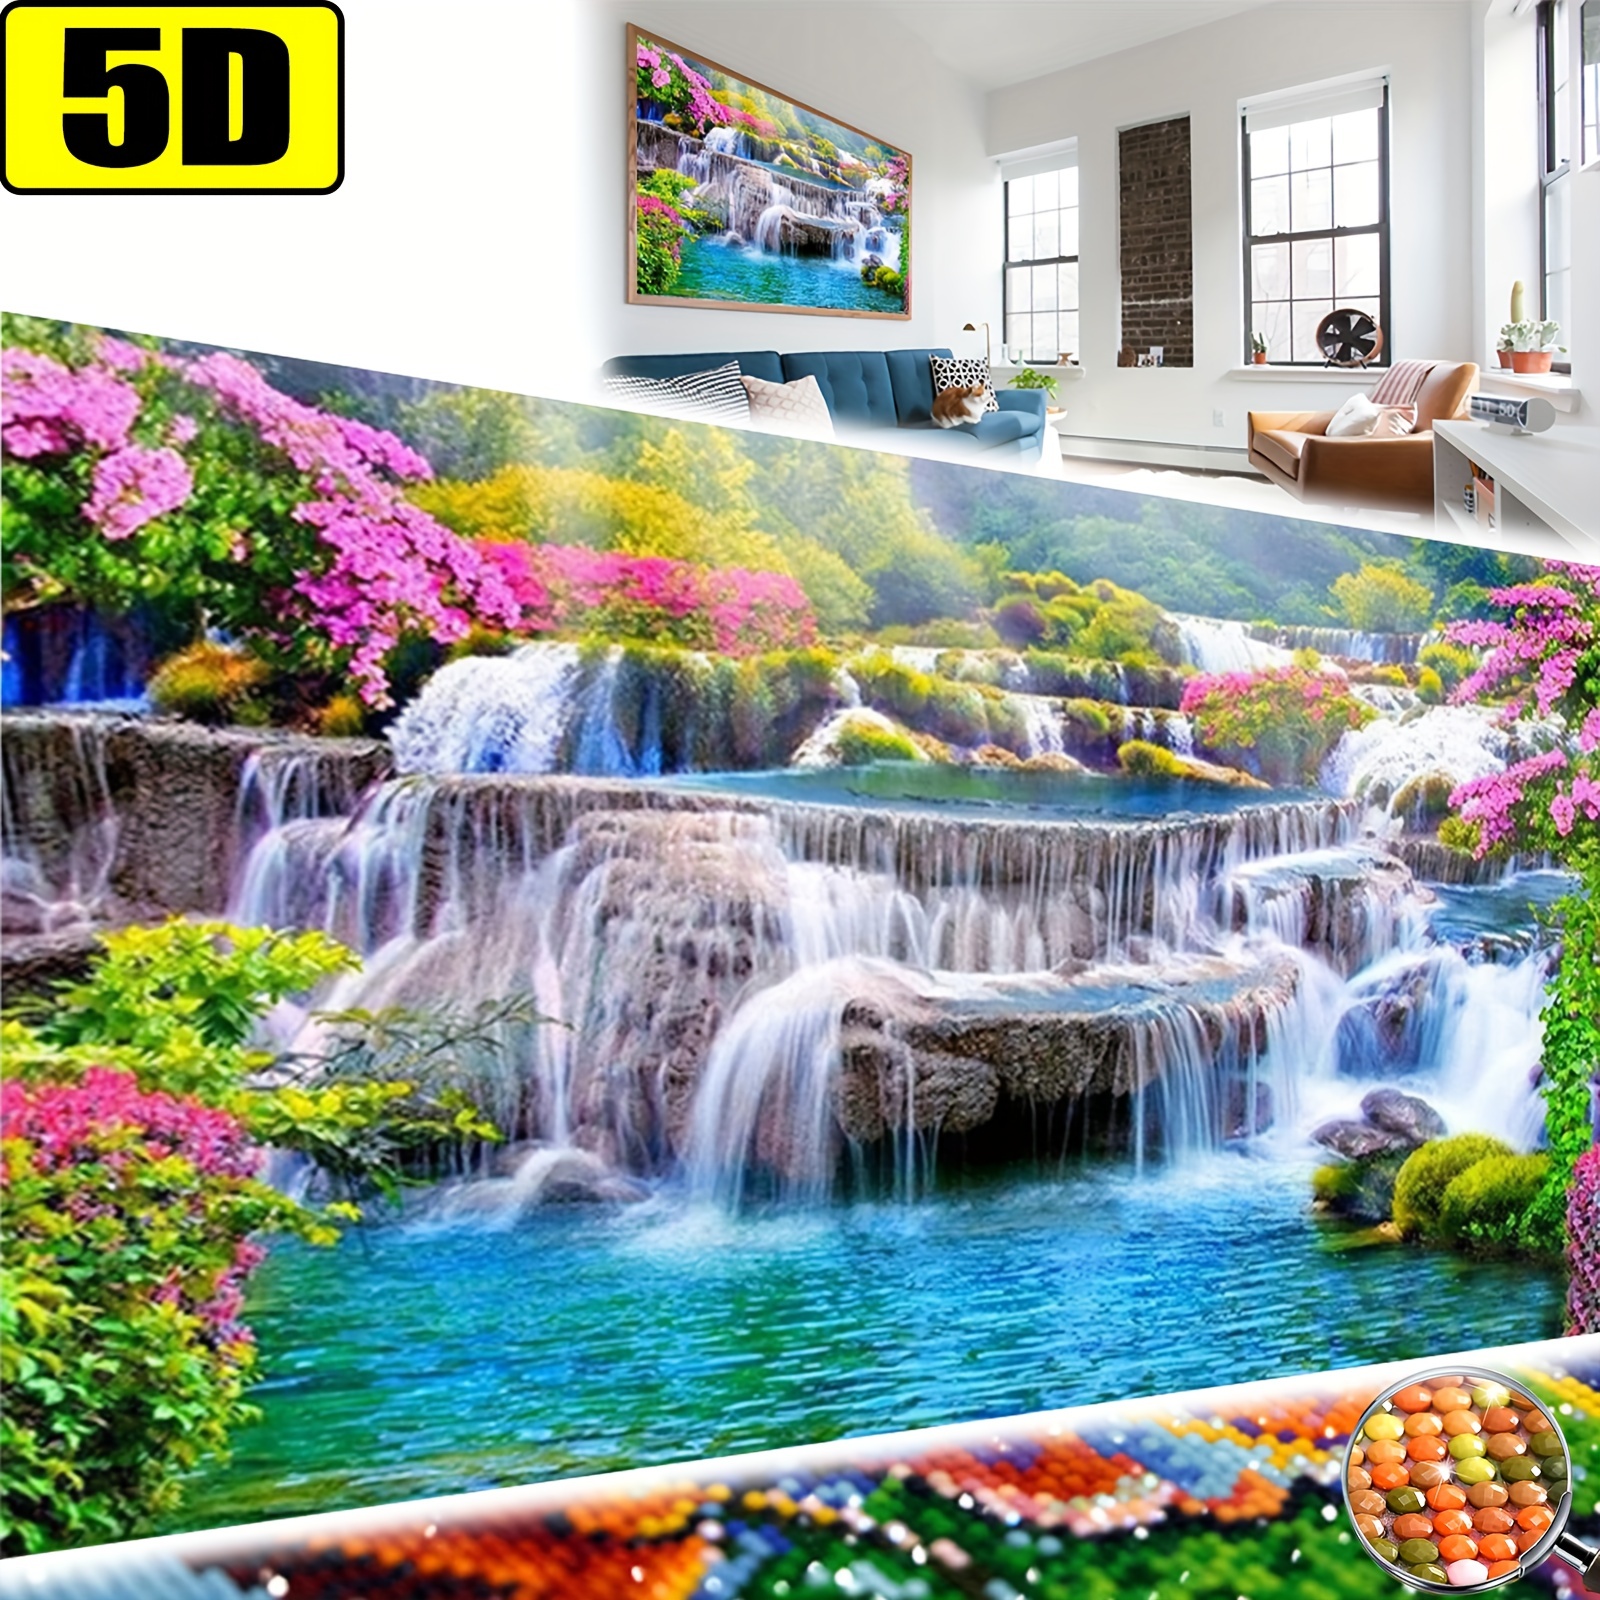 5d Diy Large Diamond Painting Kits For Adults, Waterfall Round